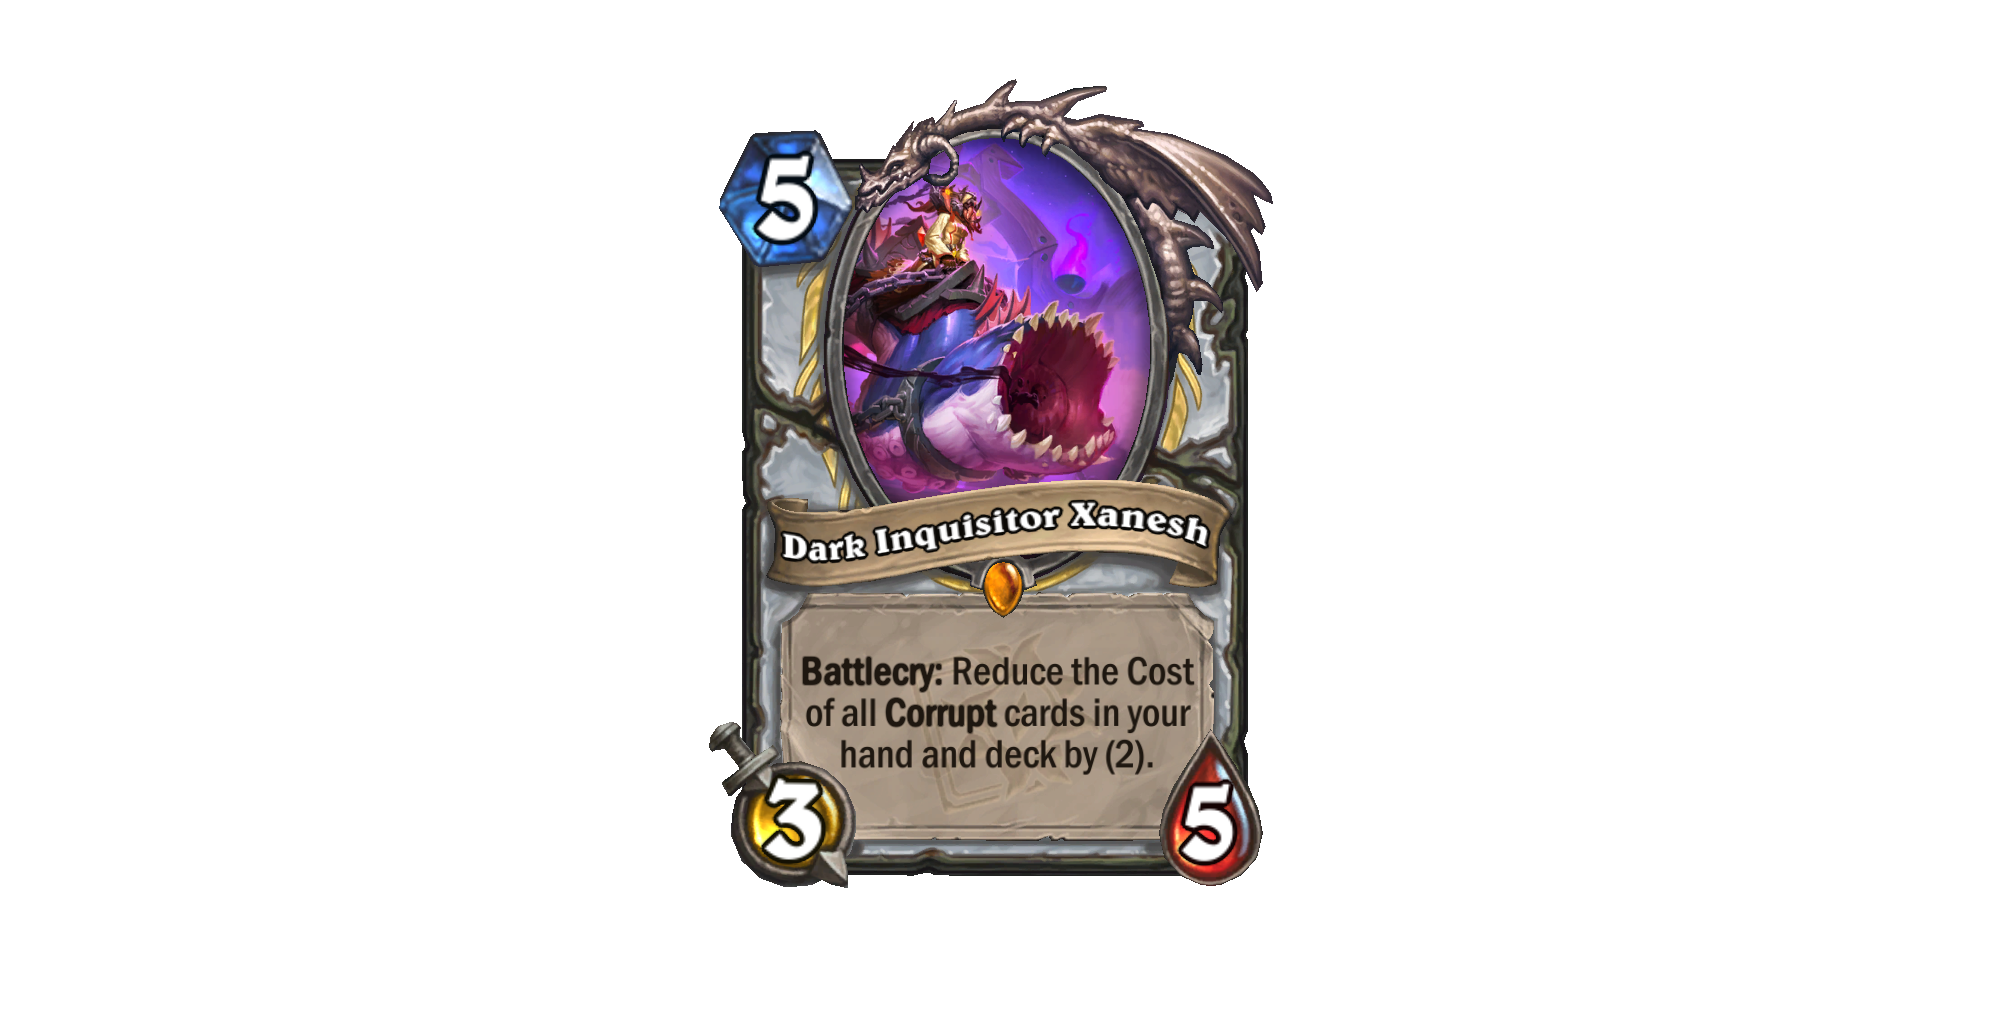 A card from the Darkmoon Races mini-set